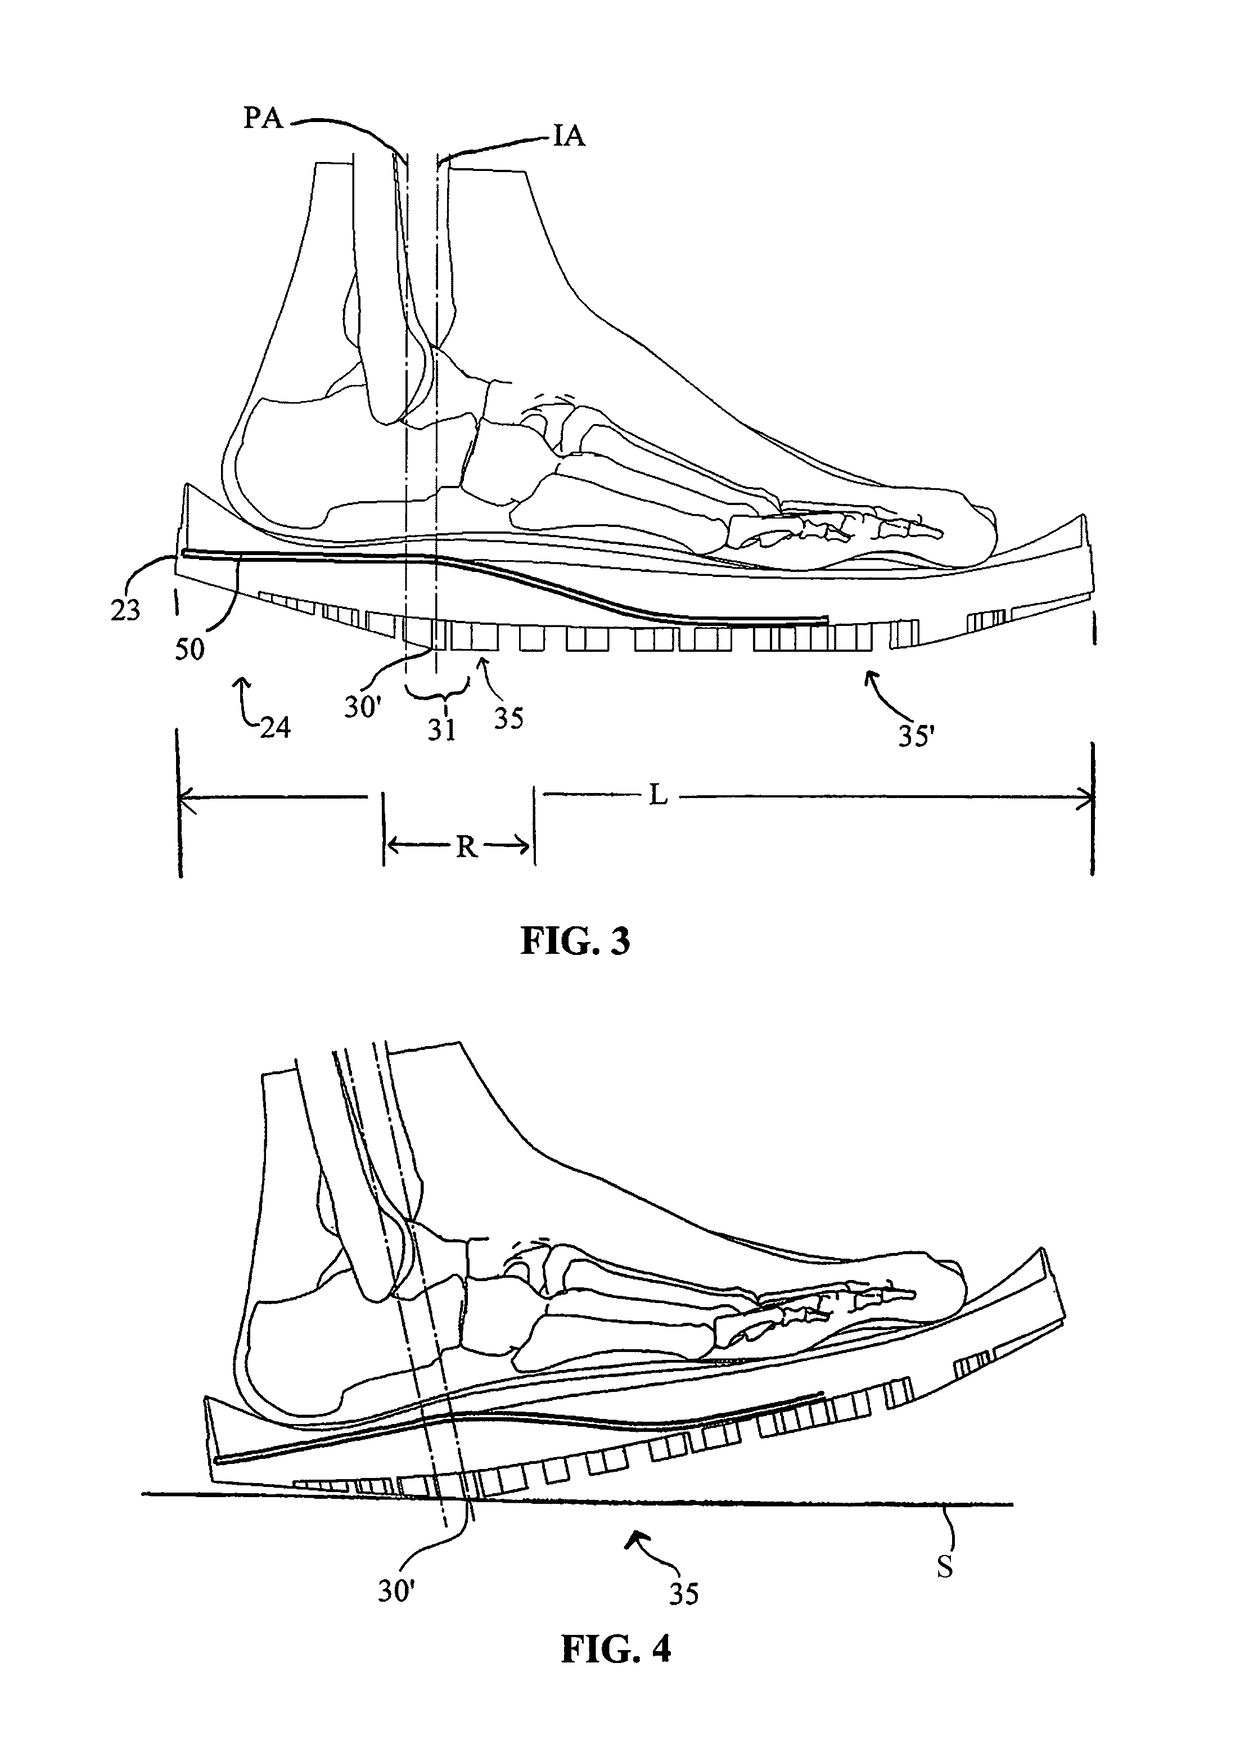 Footwear with tapered heel, support plate, and impact point measurement methods therefore